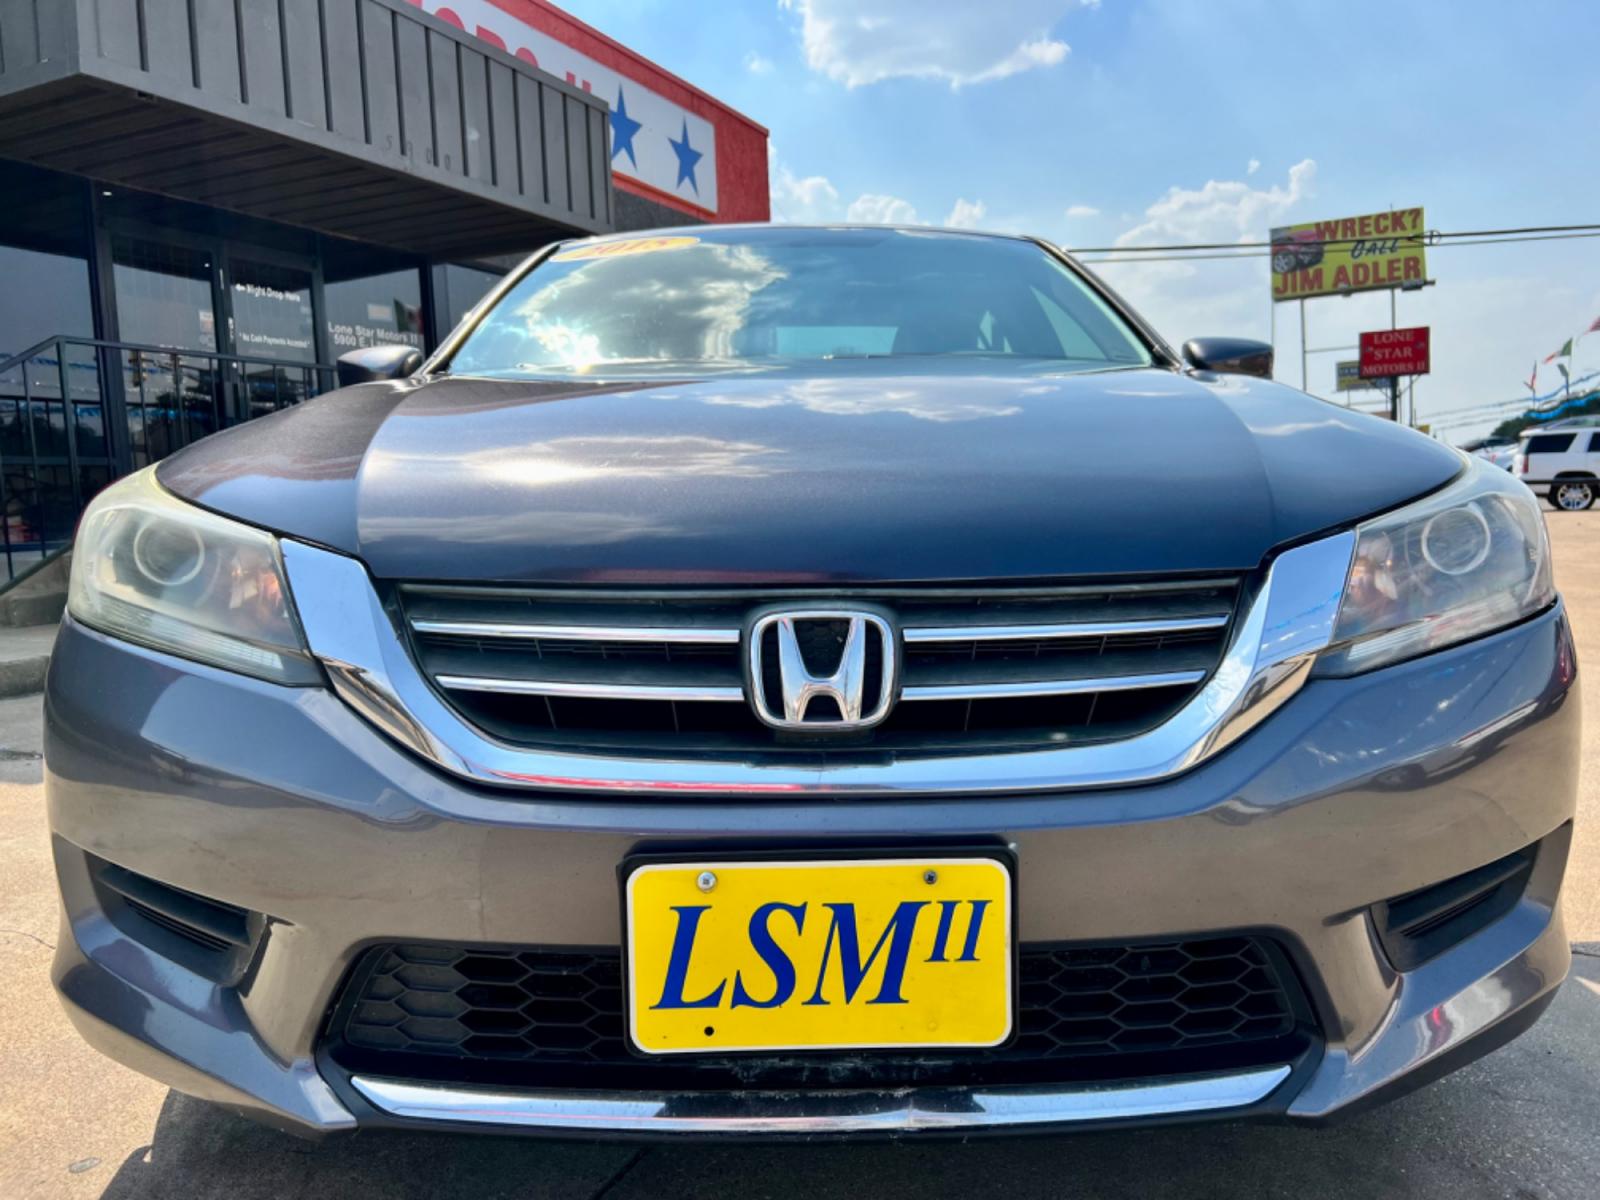 2015 SILVER HONDA ACCORD (1HGCR2F36FA) , located at 5900 E. Lancaster Ave., Fort Worth, TX, 76112, (817) 457-5456, 0.000000, 0.000000 - This is a 2015 HONDA ACCORD 4 DOOR SEDAN that is in excellent condition. There are no dents or scratches. The interior is clean with no rips or tears or stains. All power windows, door locks and seats. Ice cold AC for those hot Texas summer days. It is equipped with a CD player, AM/FM radio, AUX por - Photo #2